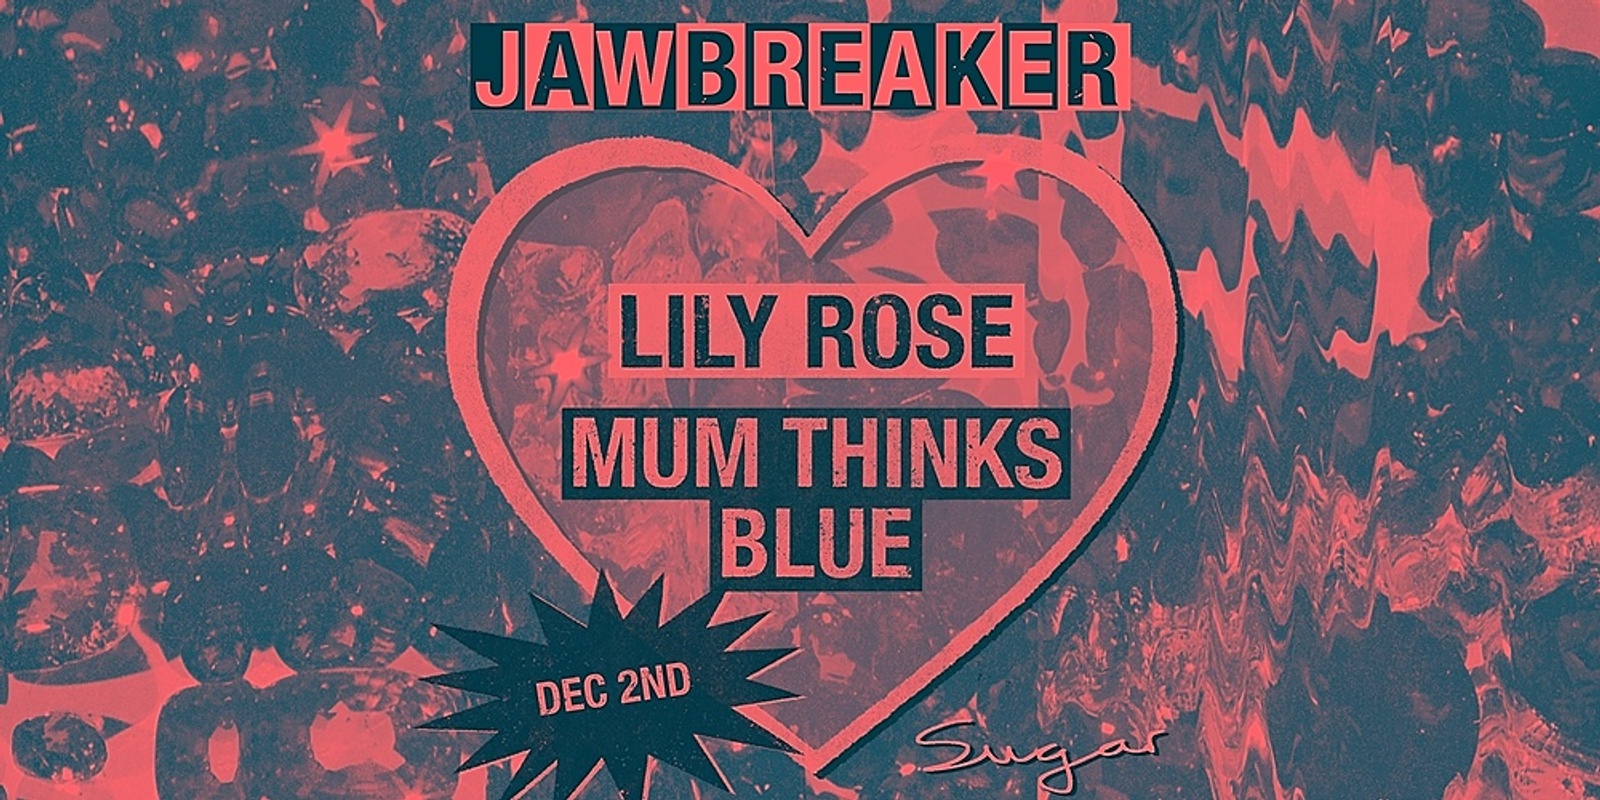 Banner image for Jawbreaker: Lily Rose and Mum Thinks Blue